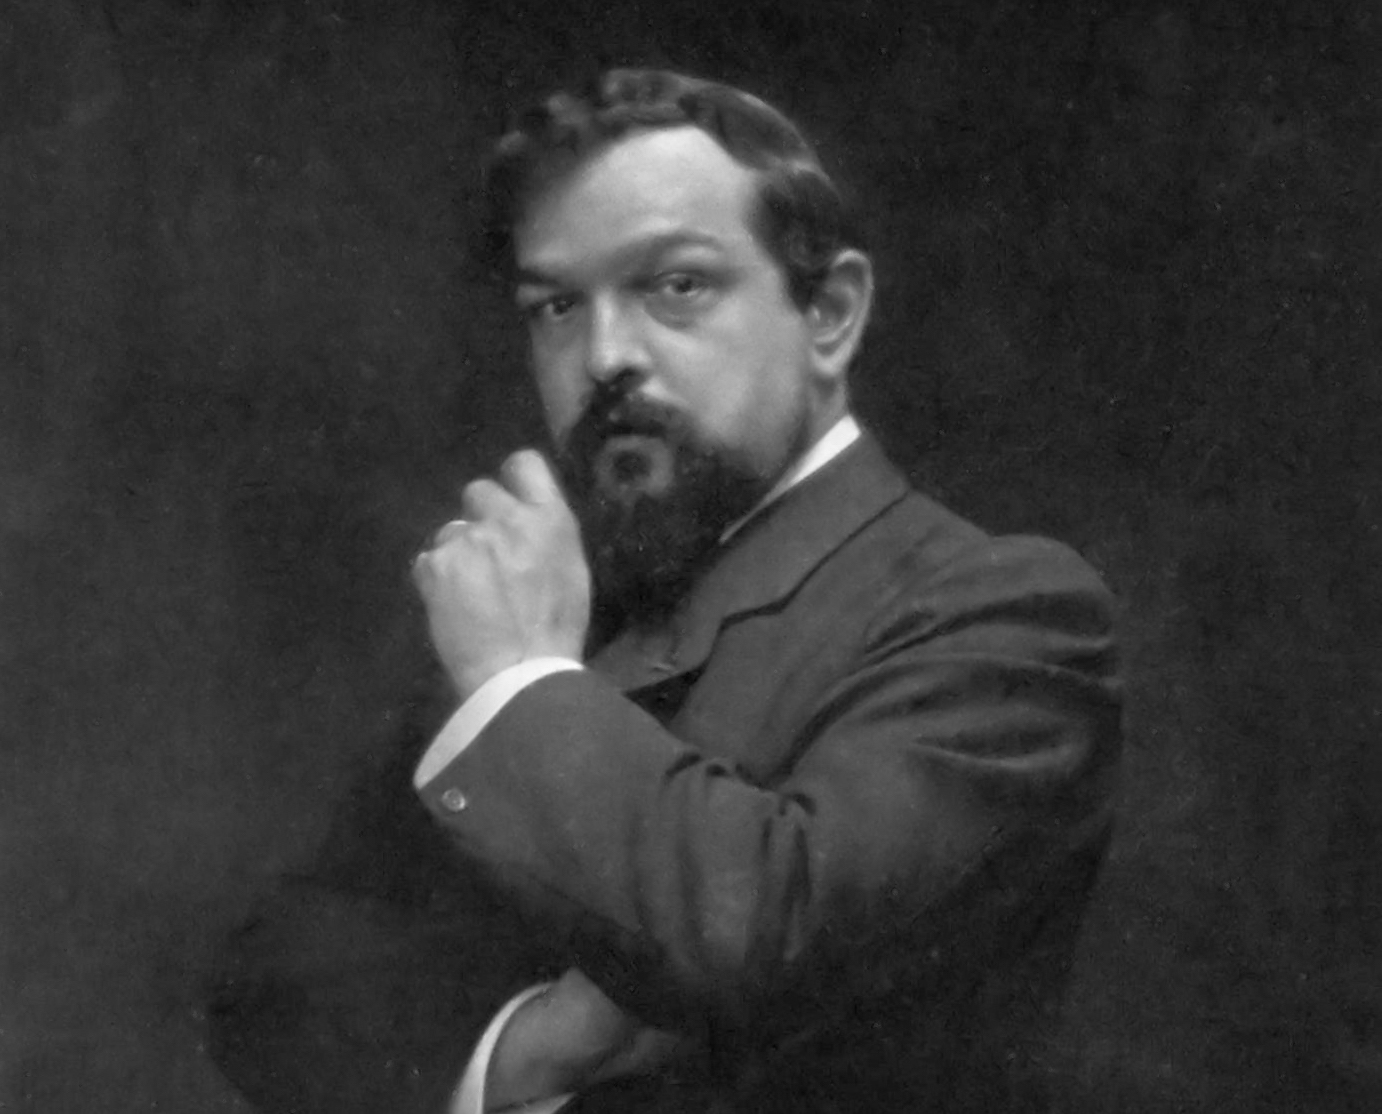 debussy compositions 1914 1915